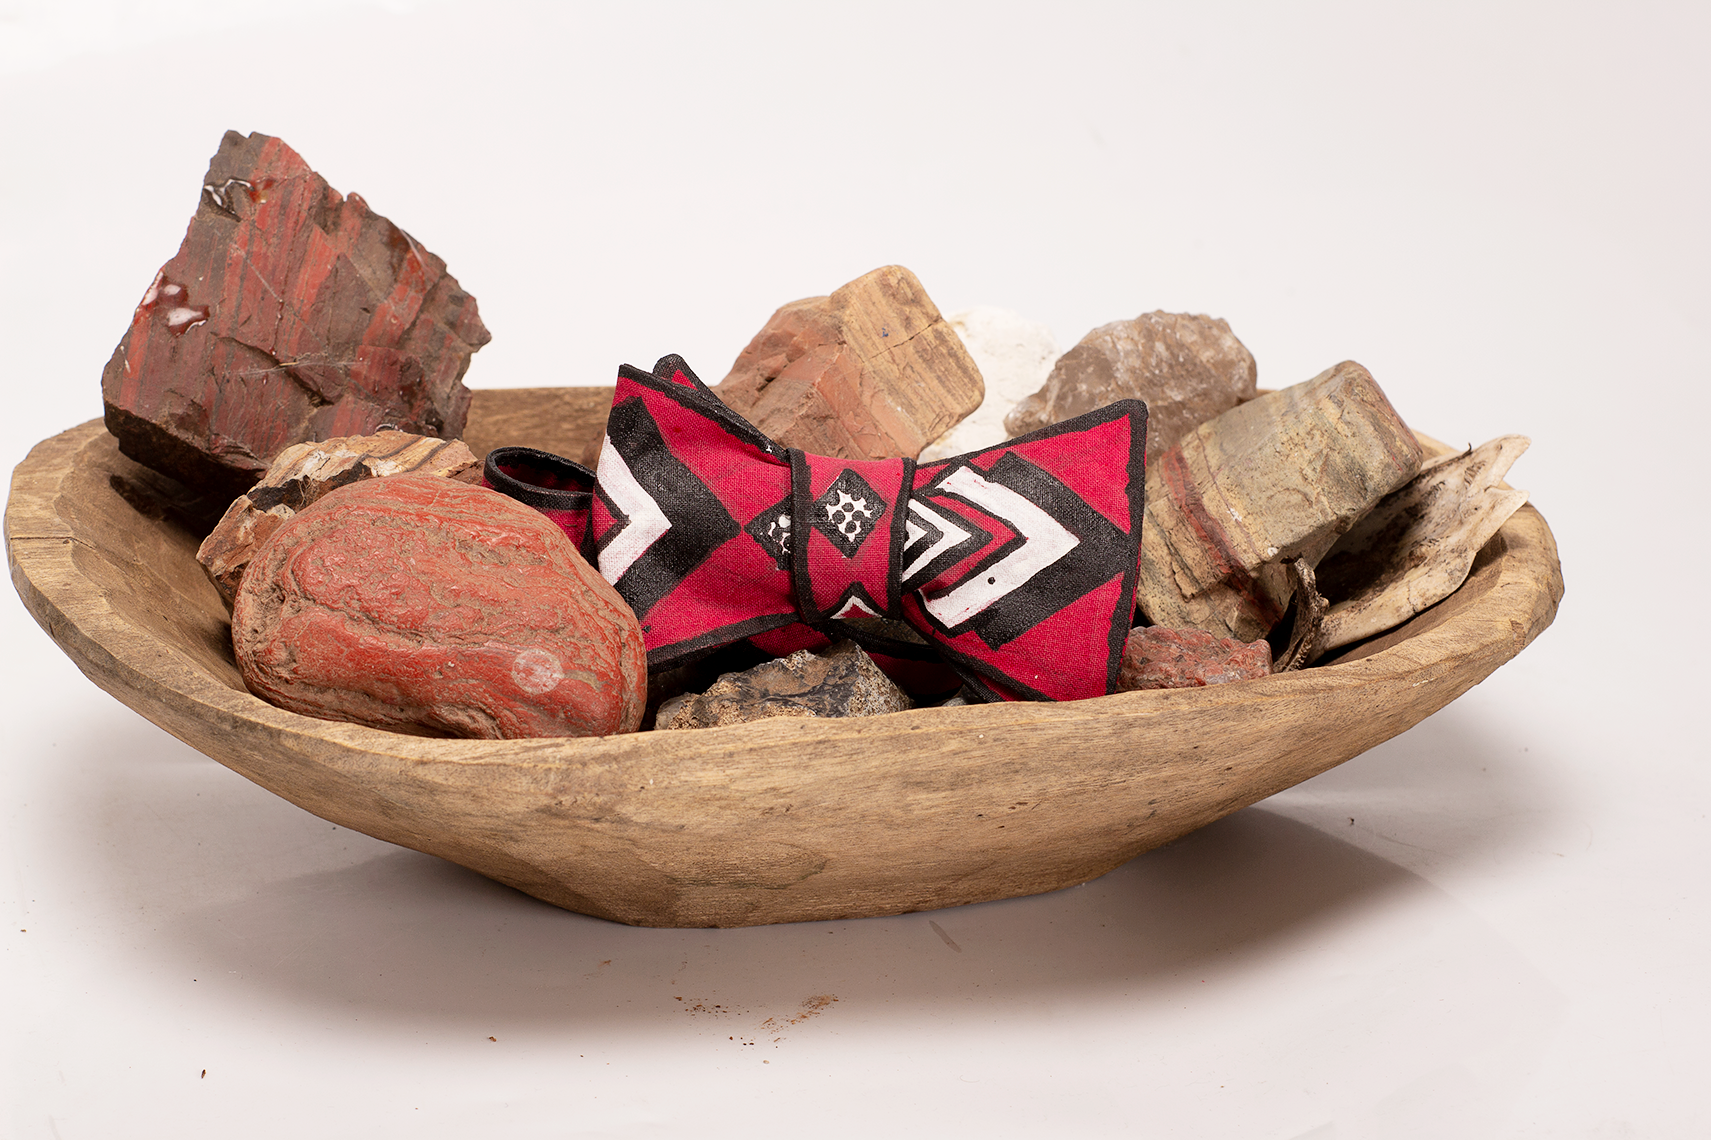 "A Rock of Society" a red, white and black self-tied bow tie handpainted by Bernardo Marira